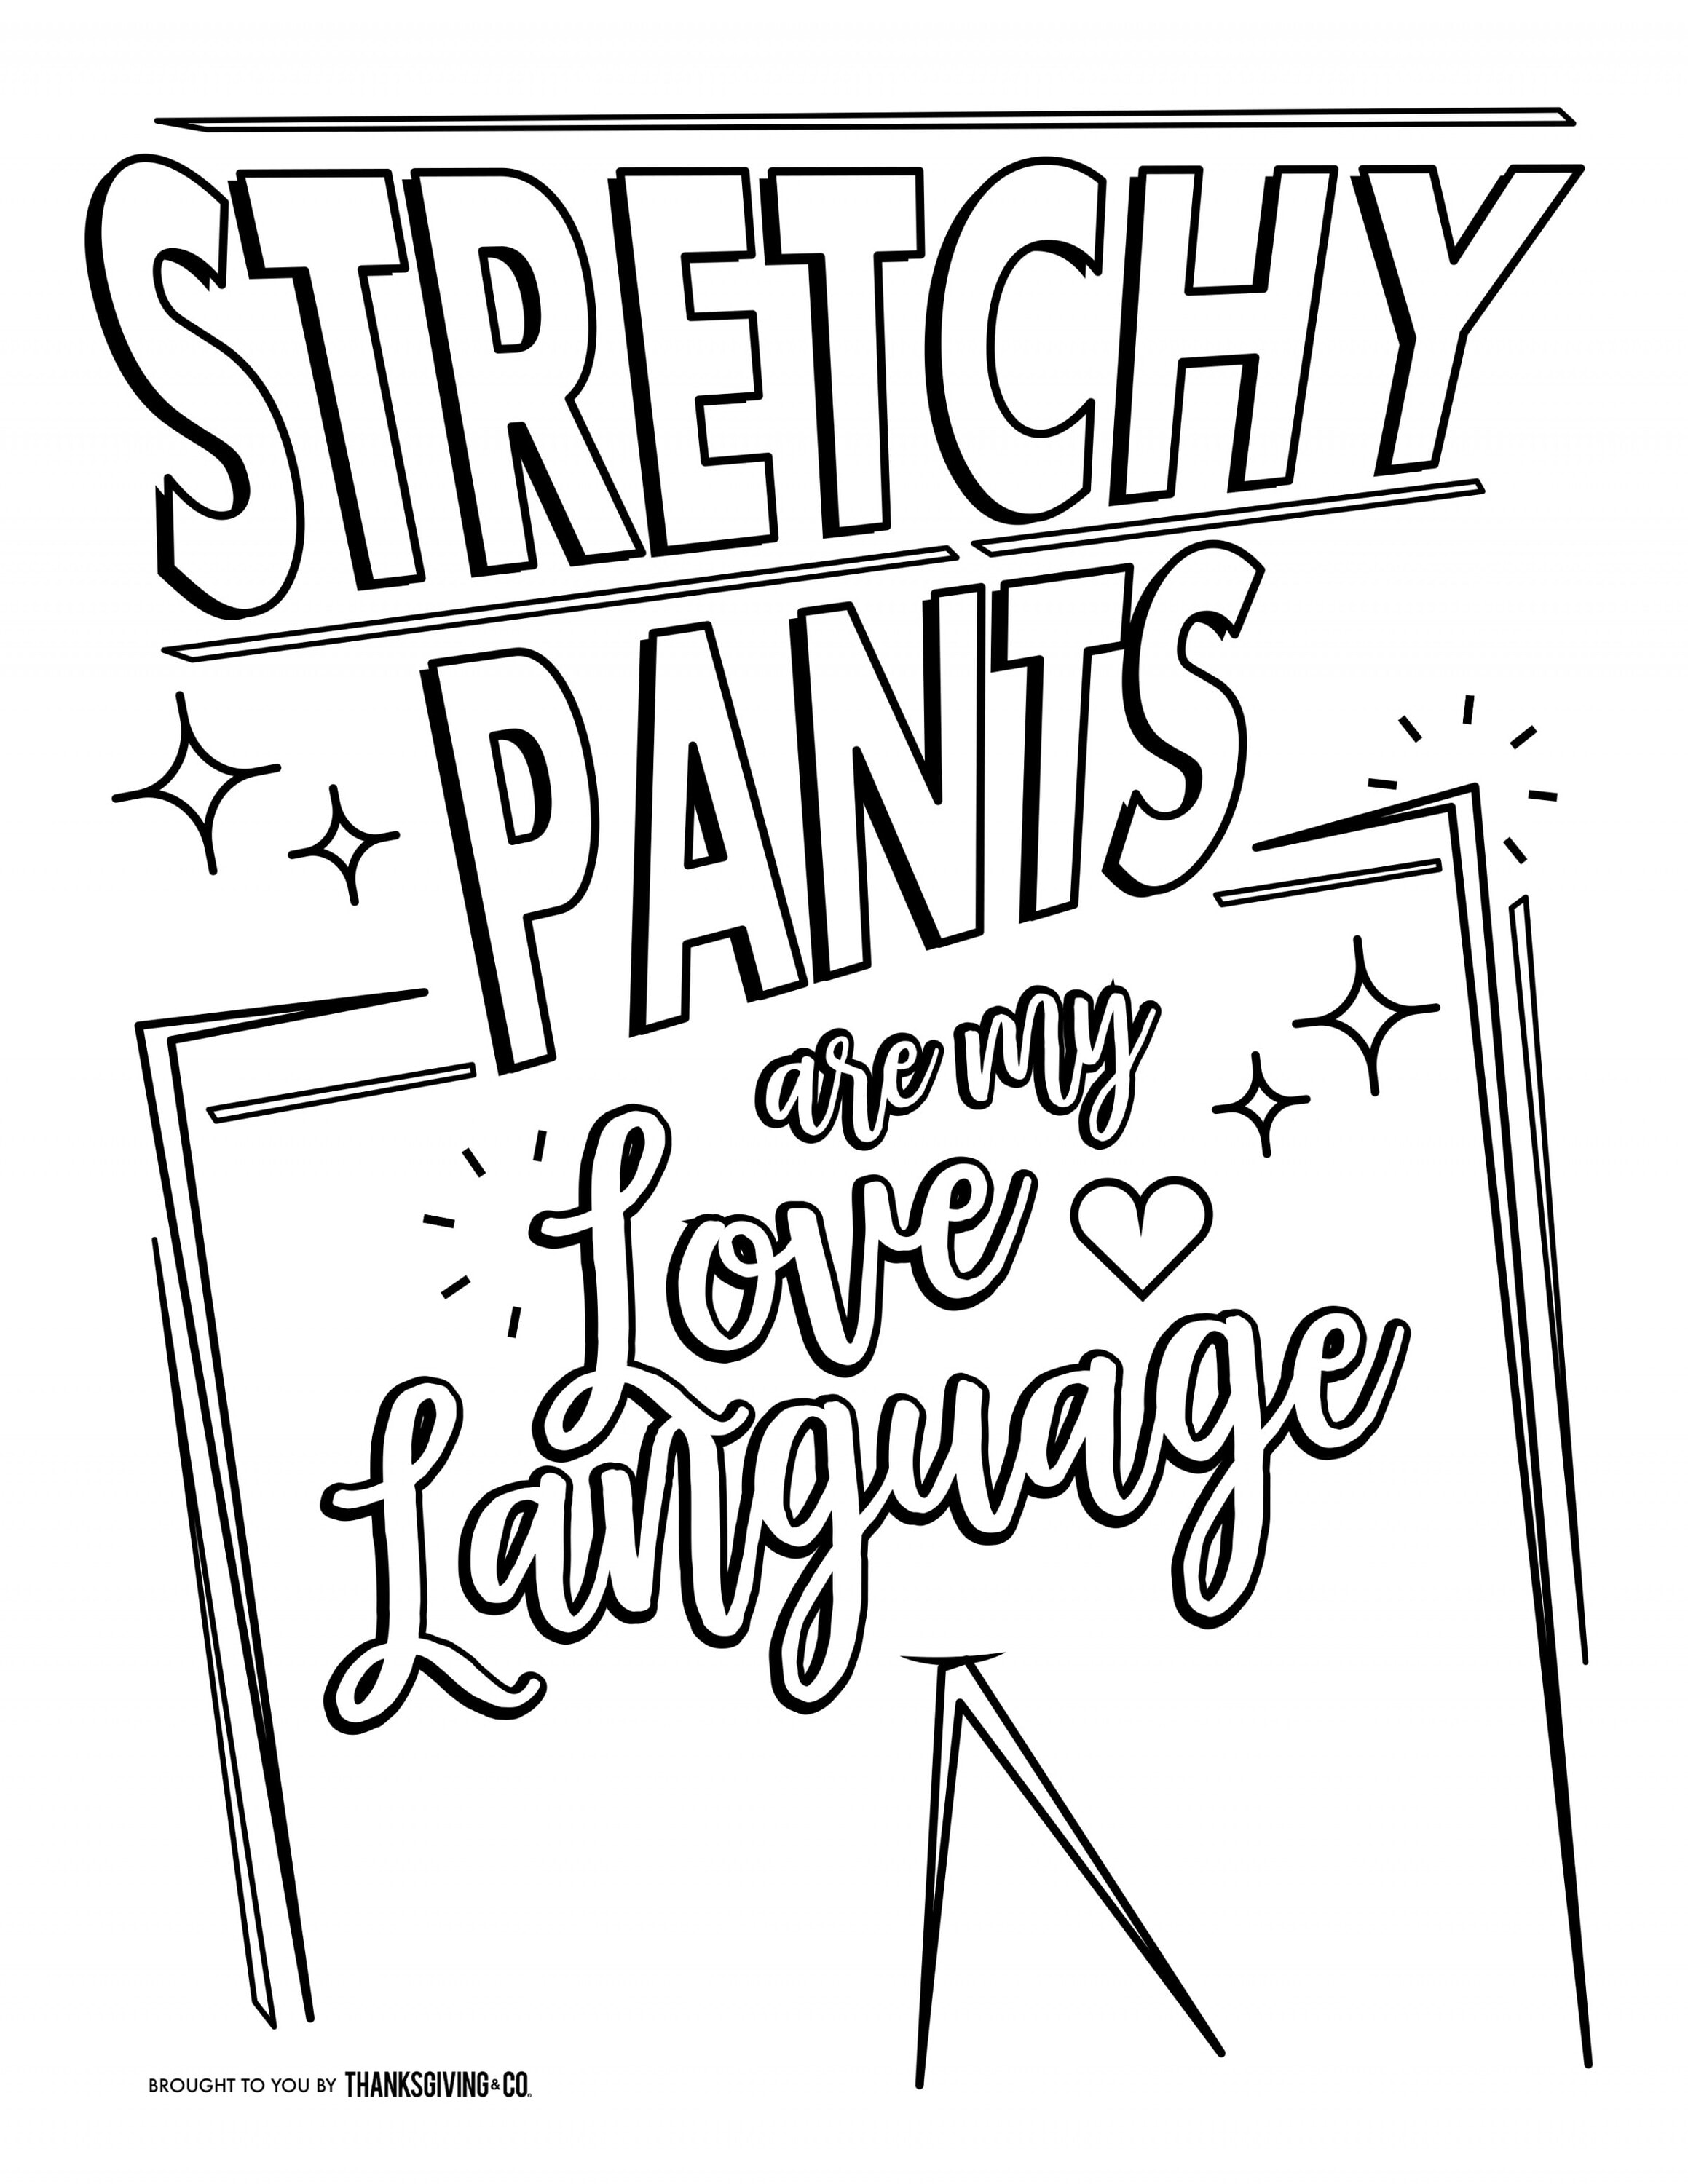 Friendsgiving adult coloring pages stretchy pants